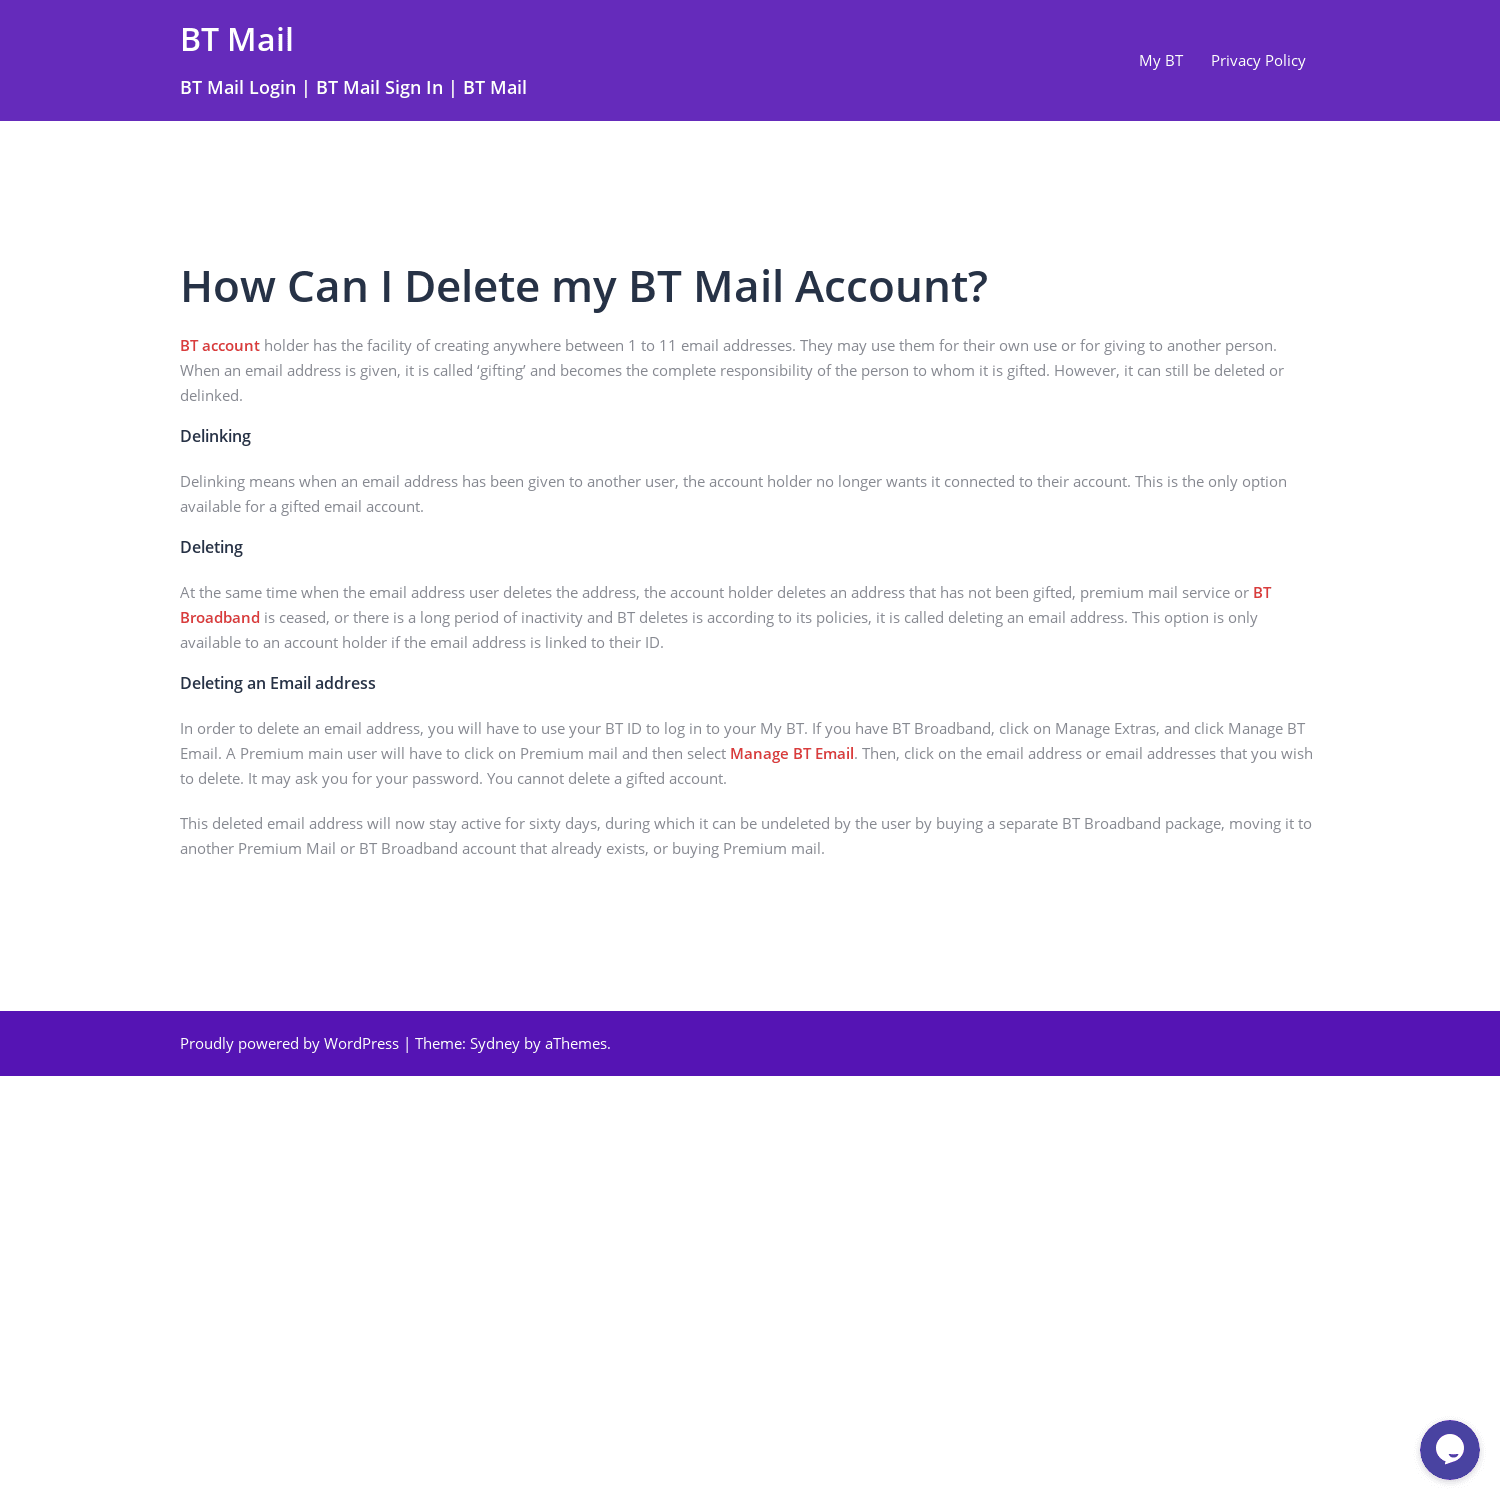 How Can I Delete my BT Mail Account? — BT Mail